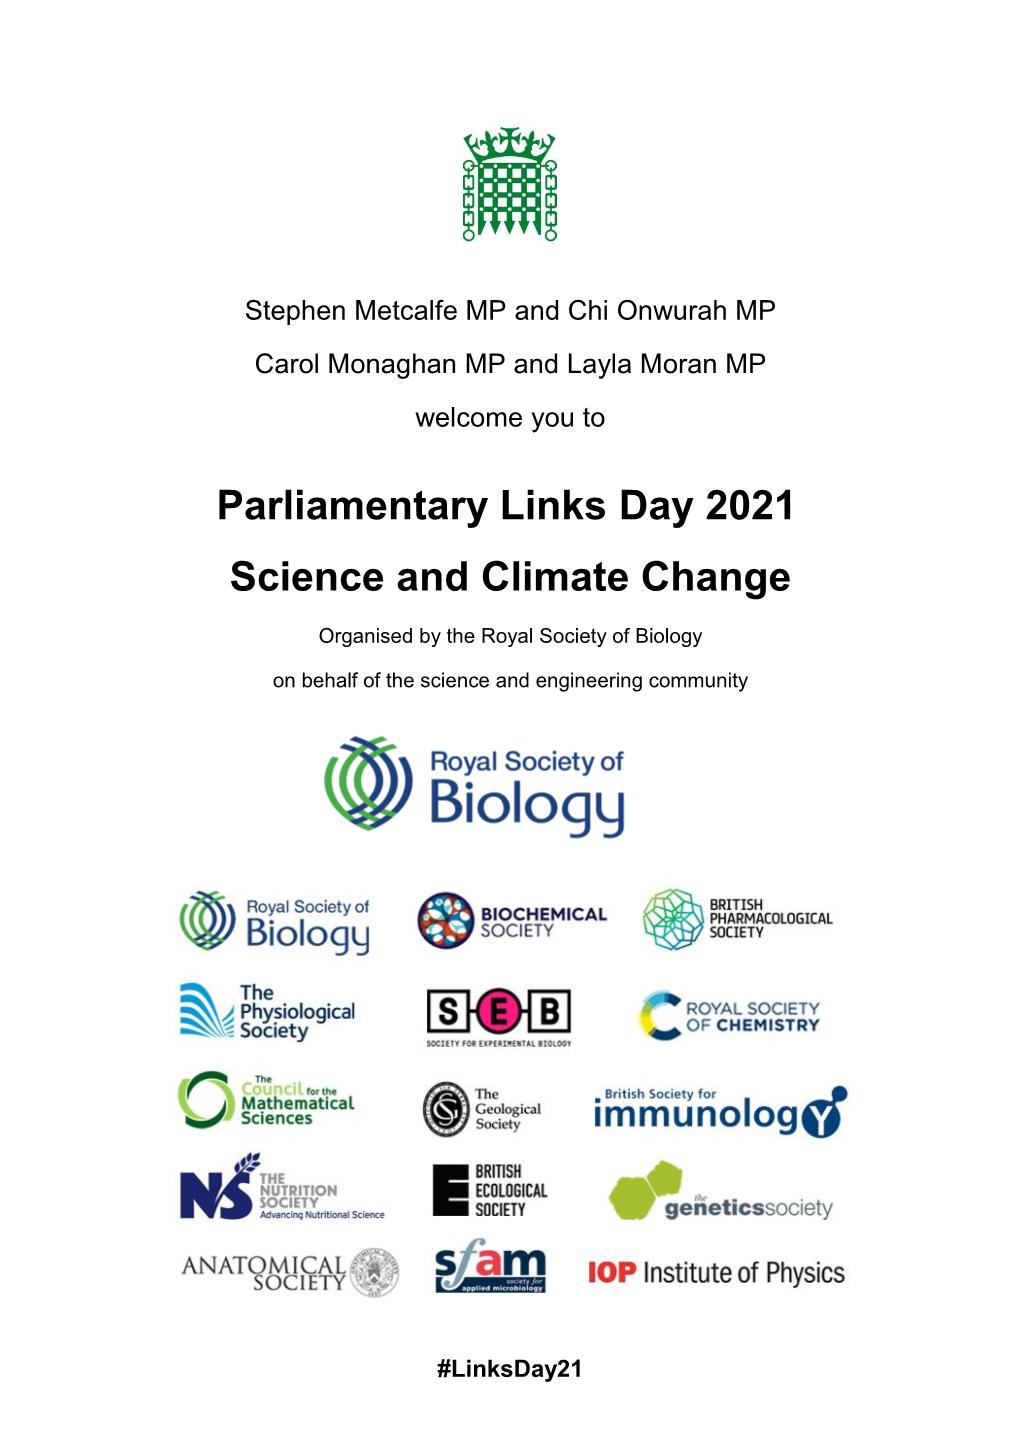 Parliamentary Links Day 2021 Science and Climate Change